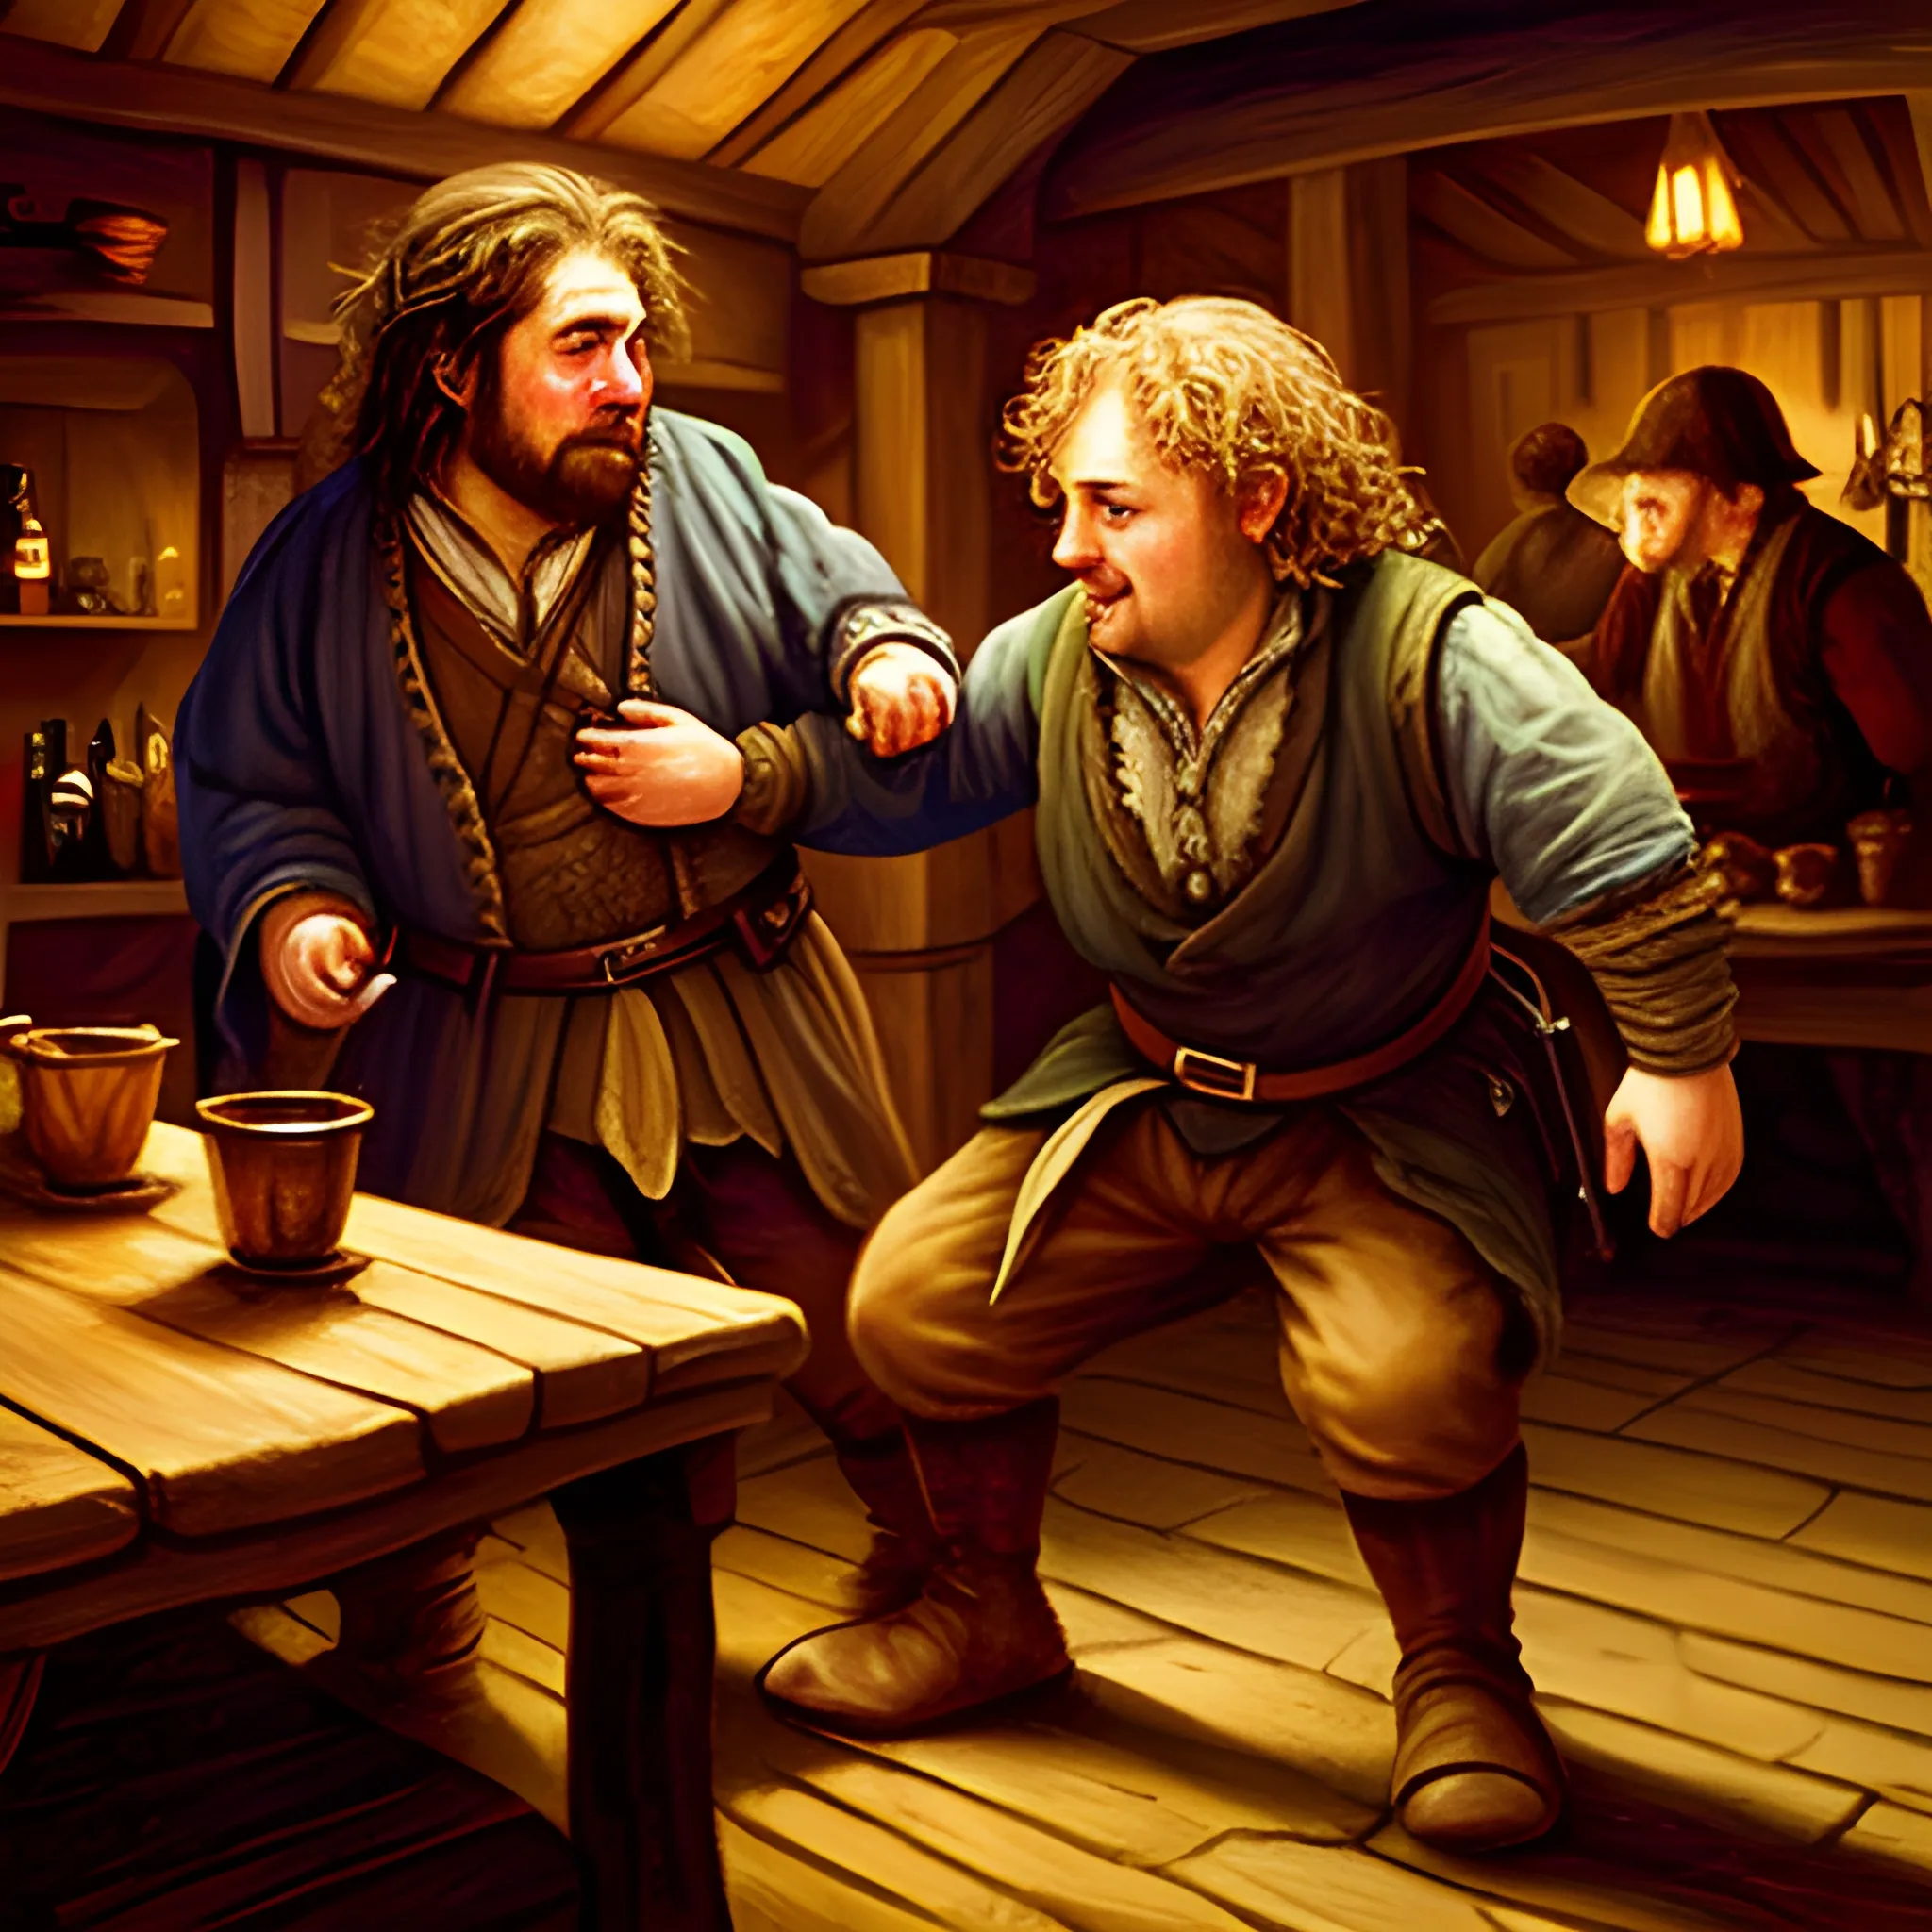 drunken and short hobbit grabbed by the neck by a tall brigand in the tavern at night, middle earth, Oil Painting